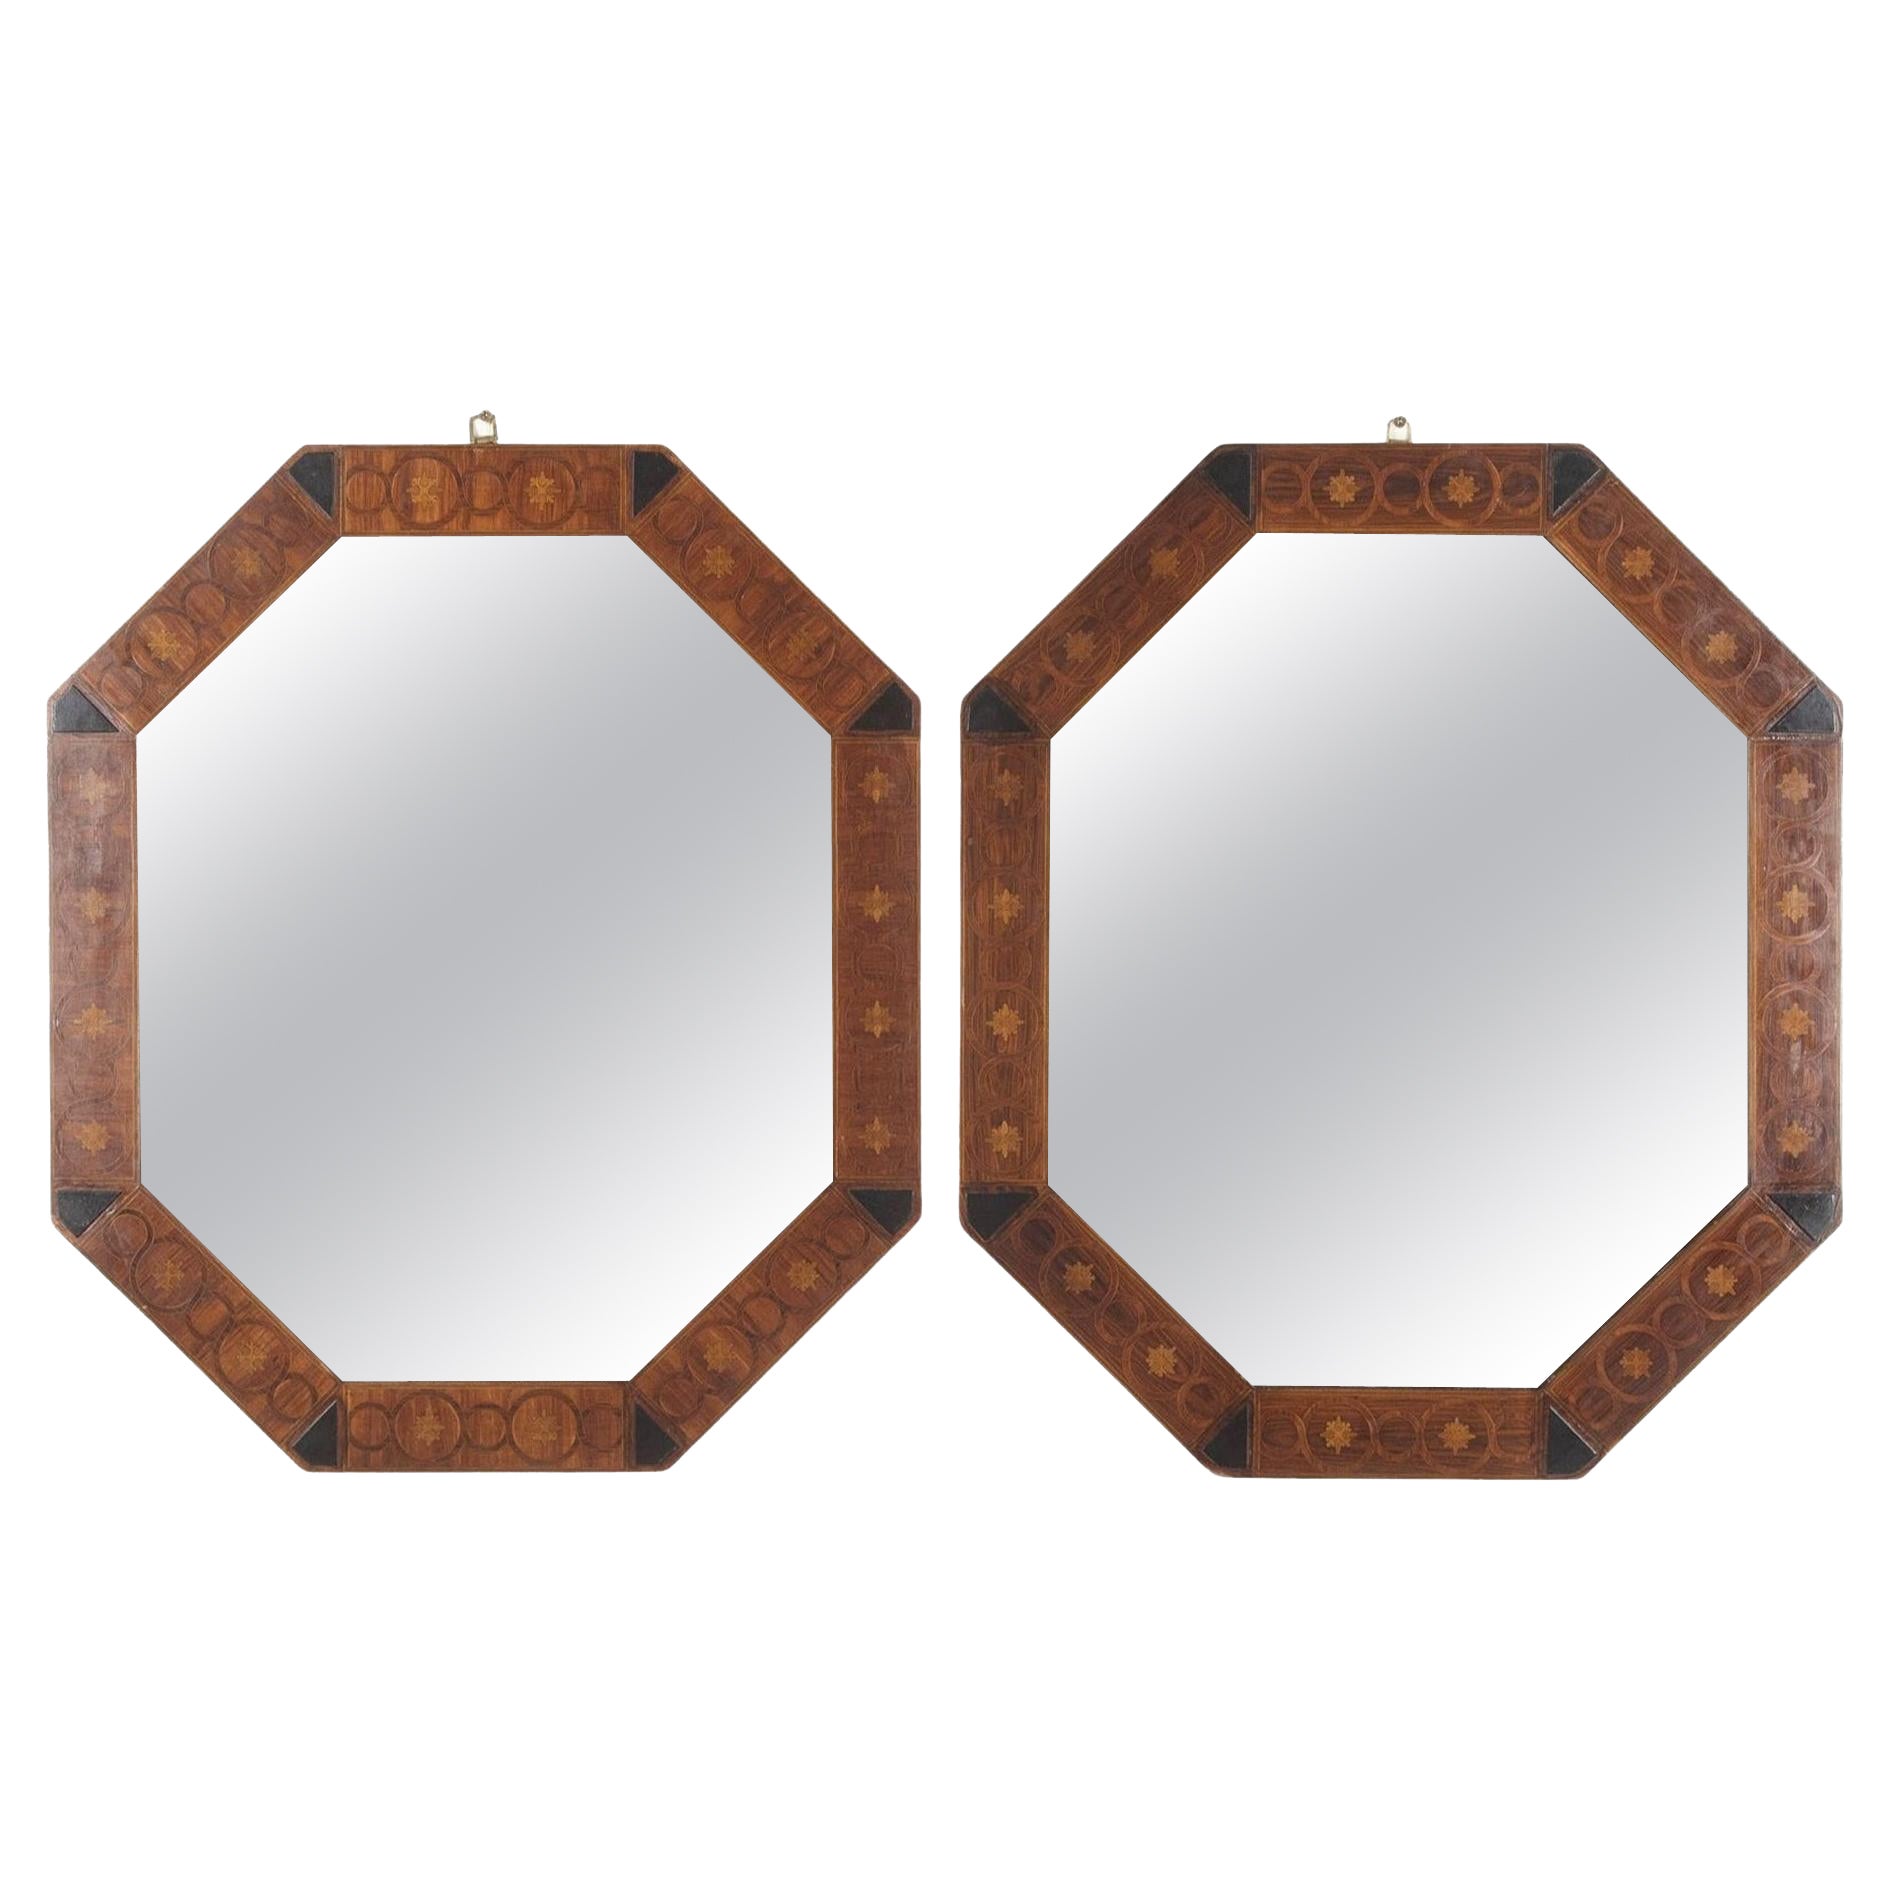 Pair of 19th Century Octagonal French Marquetry Mirrors For Sale